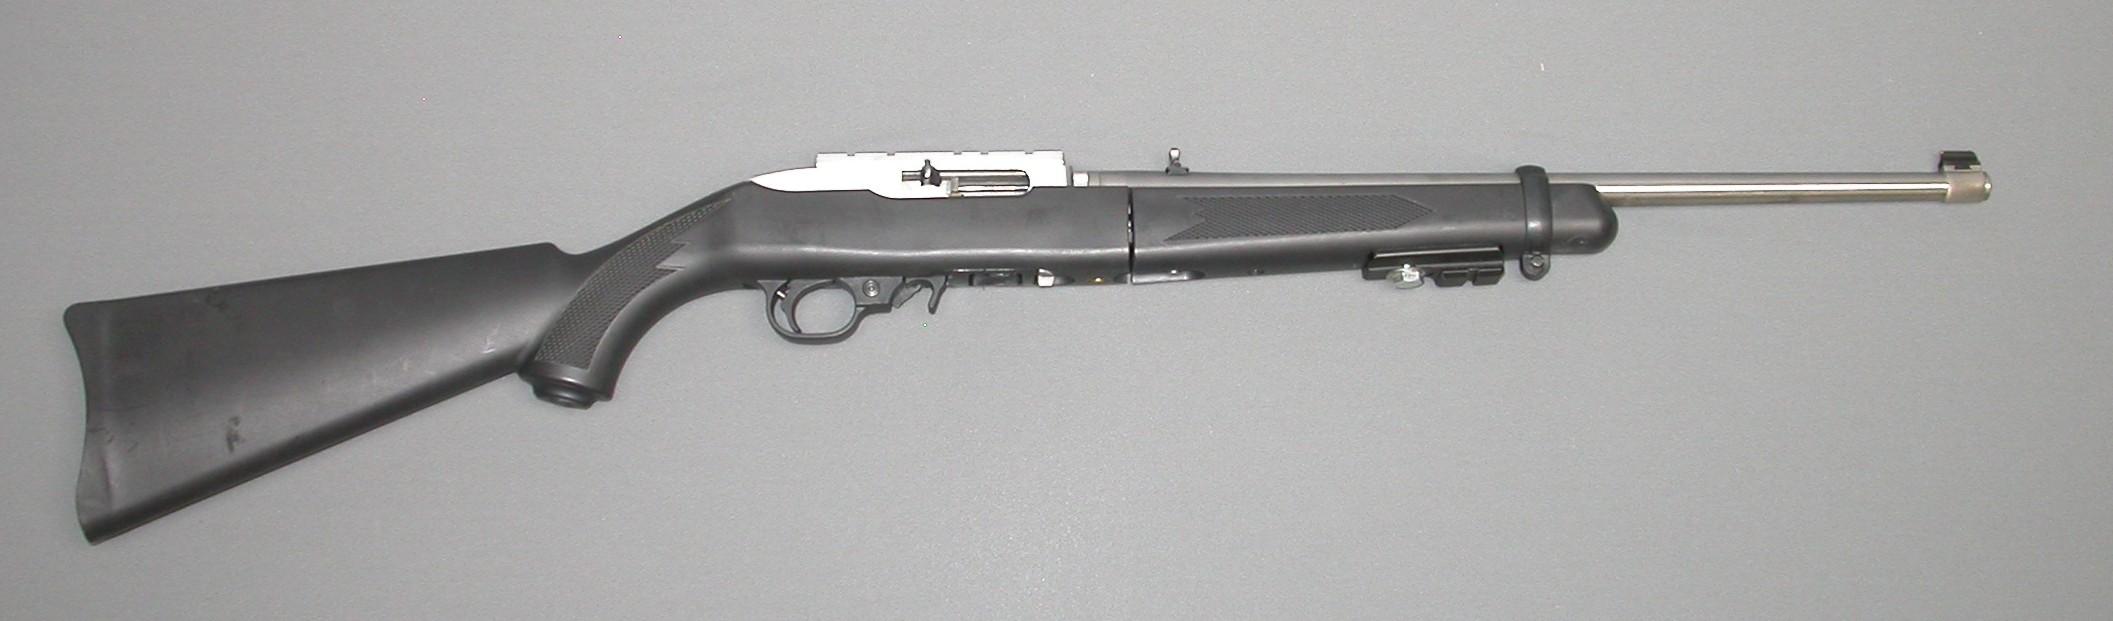 Ruger 10/22 22LR Take Down Rifle 50 Year Anniversary Edition FFL Required 829-85479 (BED1)